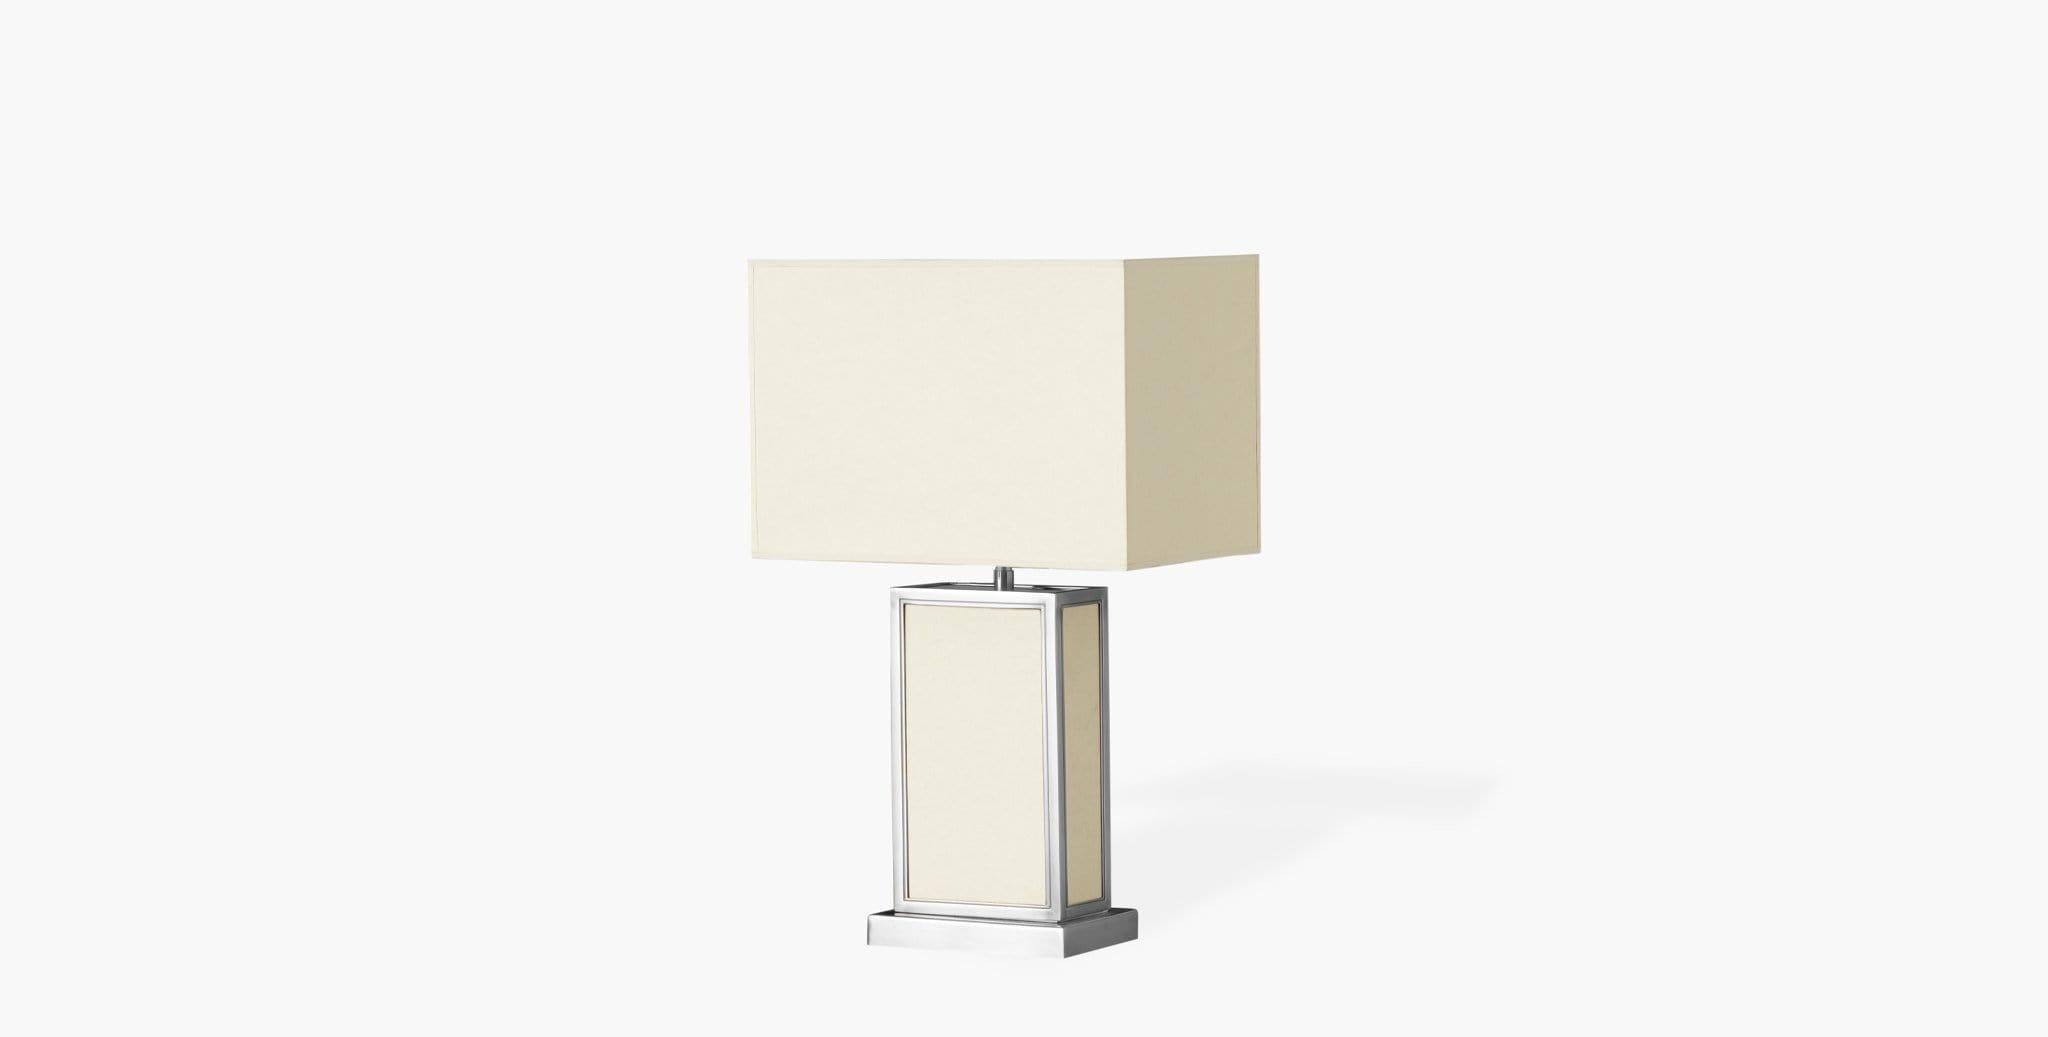 The Ivar Table Lamp radiates a soft, luminous glow that is balanced by the natural tones of its shade and base. Our handcrafted finishes are inspired by variations within natural textures. Each selection is slightly unique.

Parchment